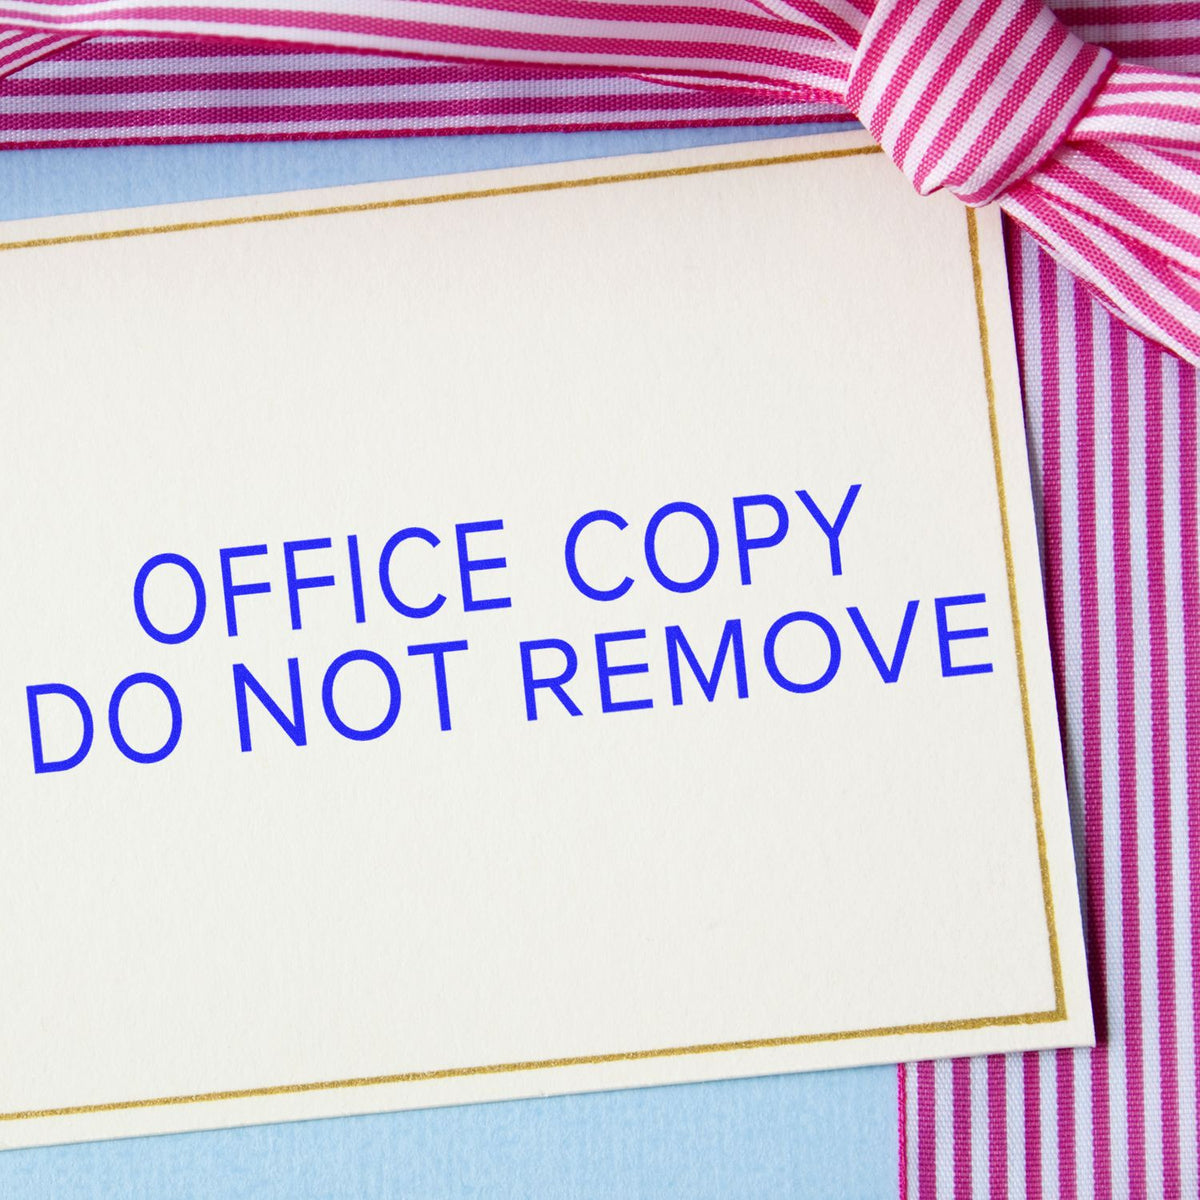 Large Narrow Font Office Copy Do Not Remove Rubber Stamp In Use Photo